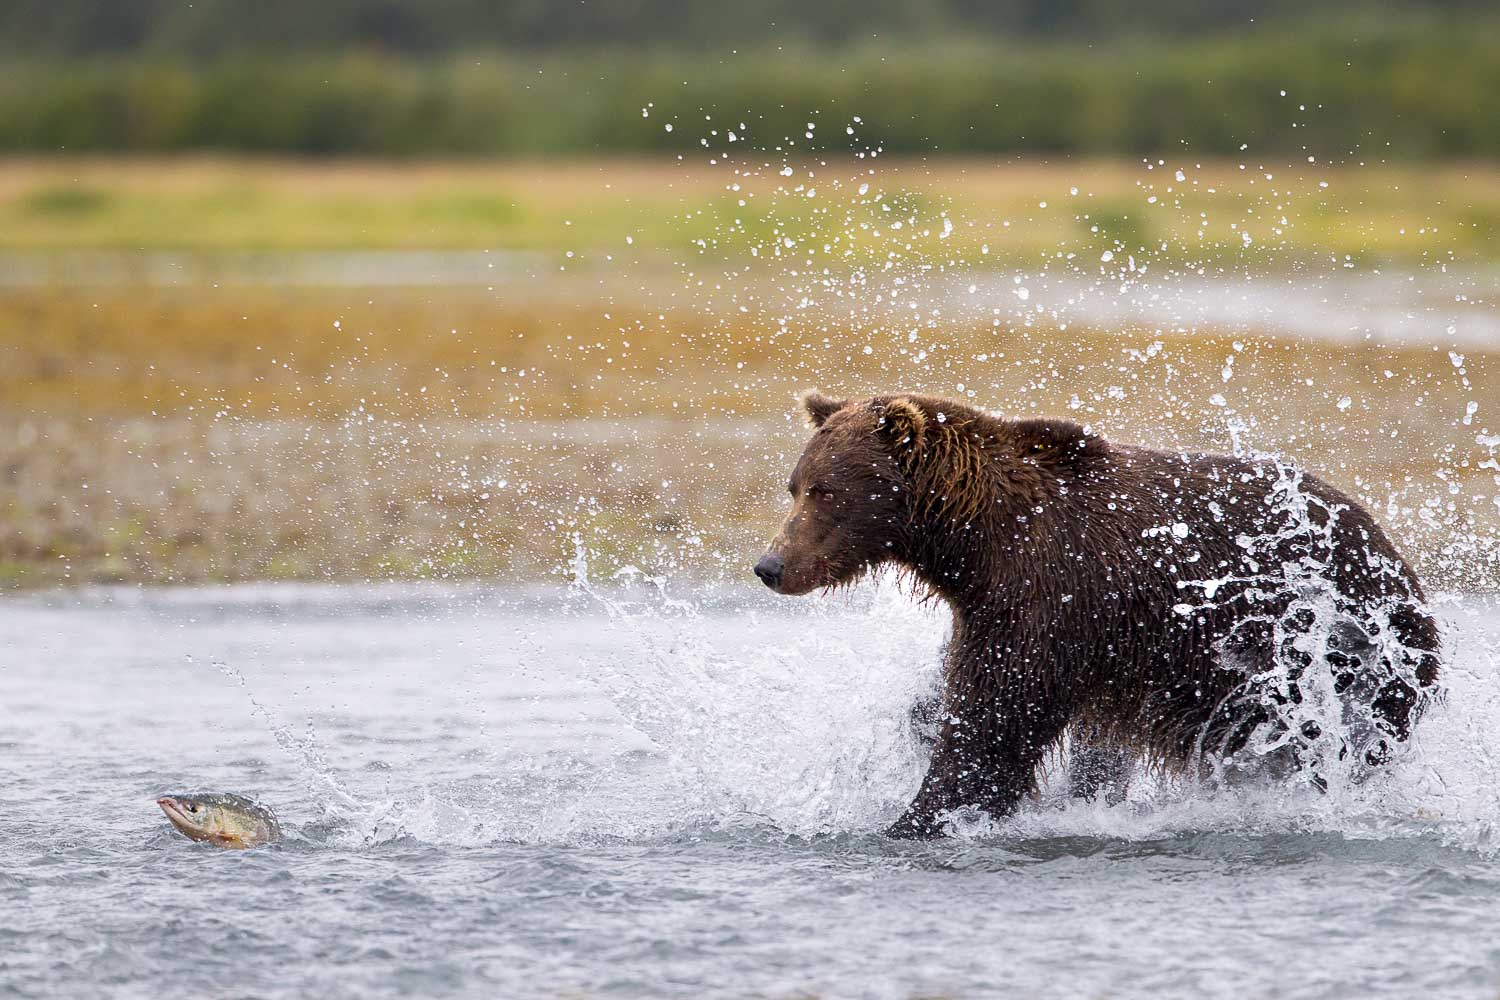 A brown bear splashes through a river, attempting to catch a leaping fish.